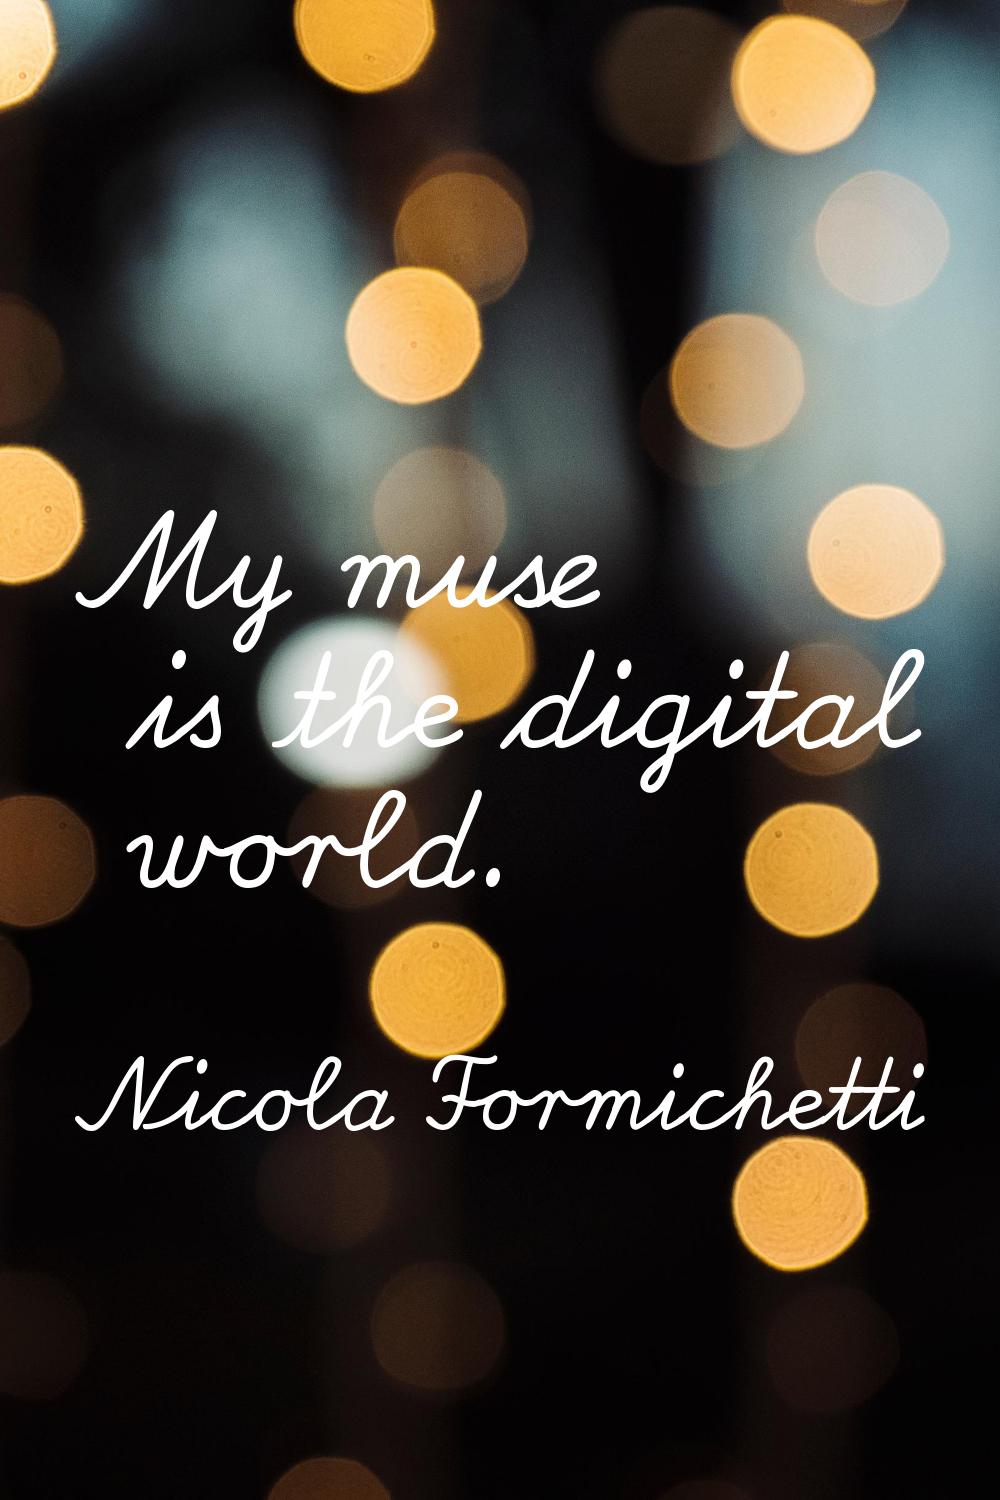 My muse is the digital world.